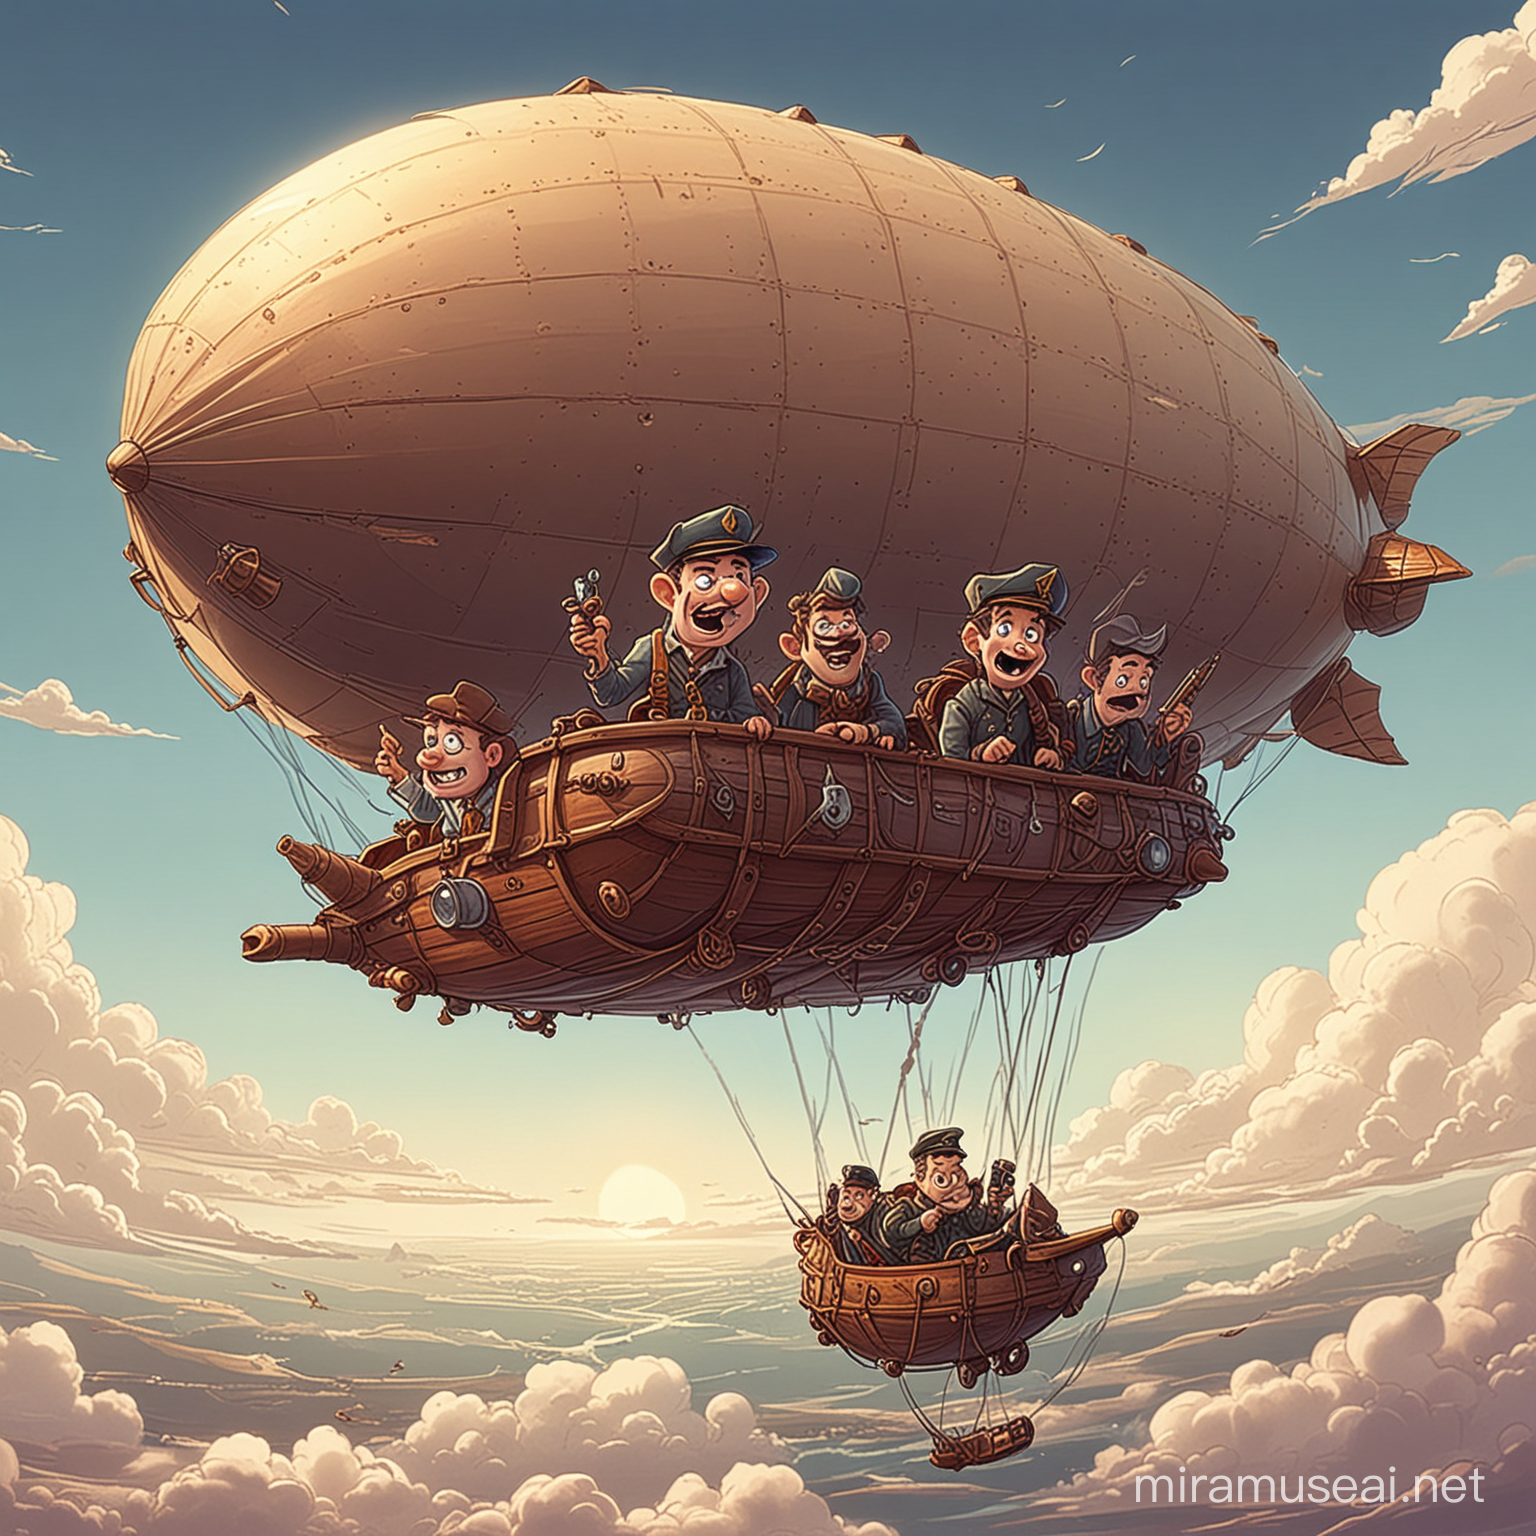 Two guys drunk driving an airship, in cartoon style